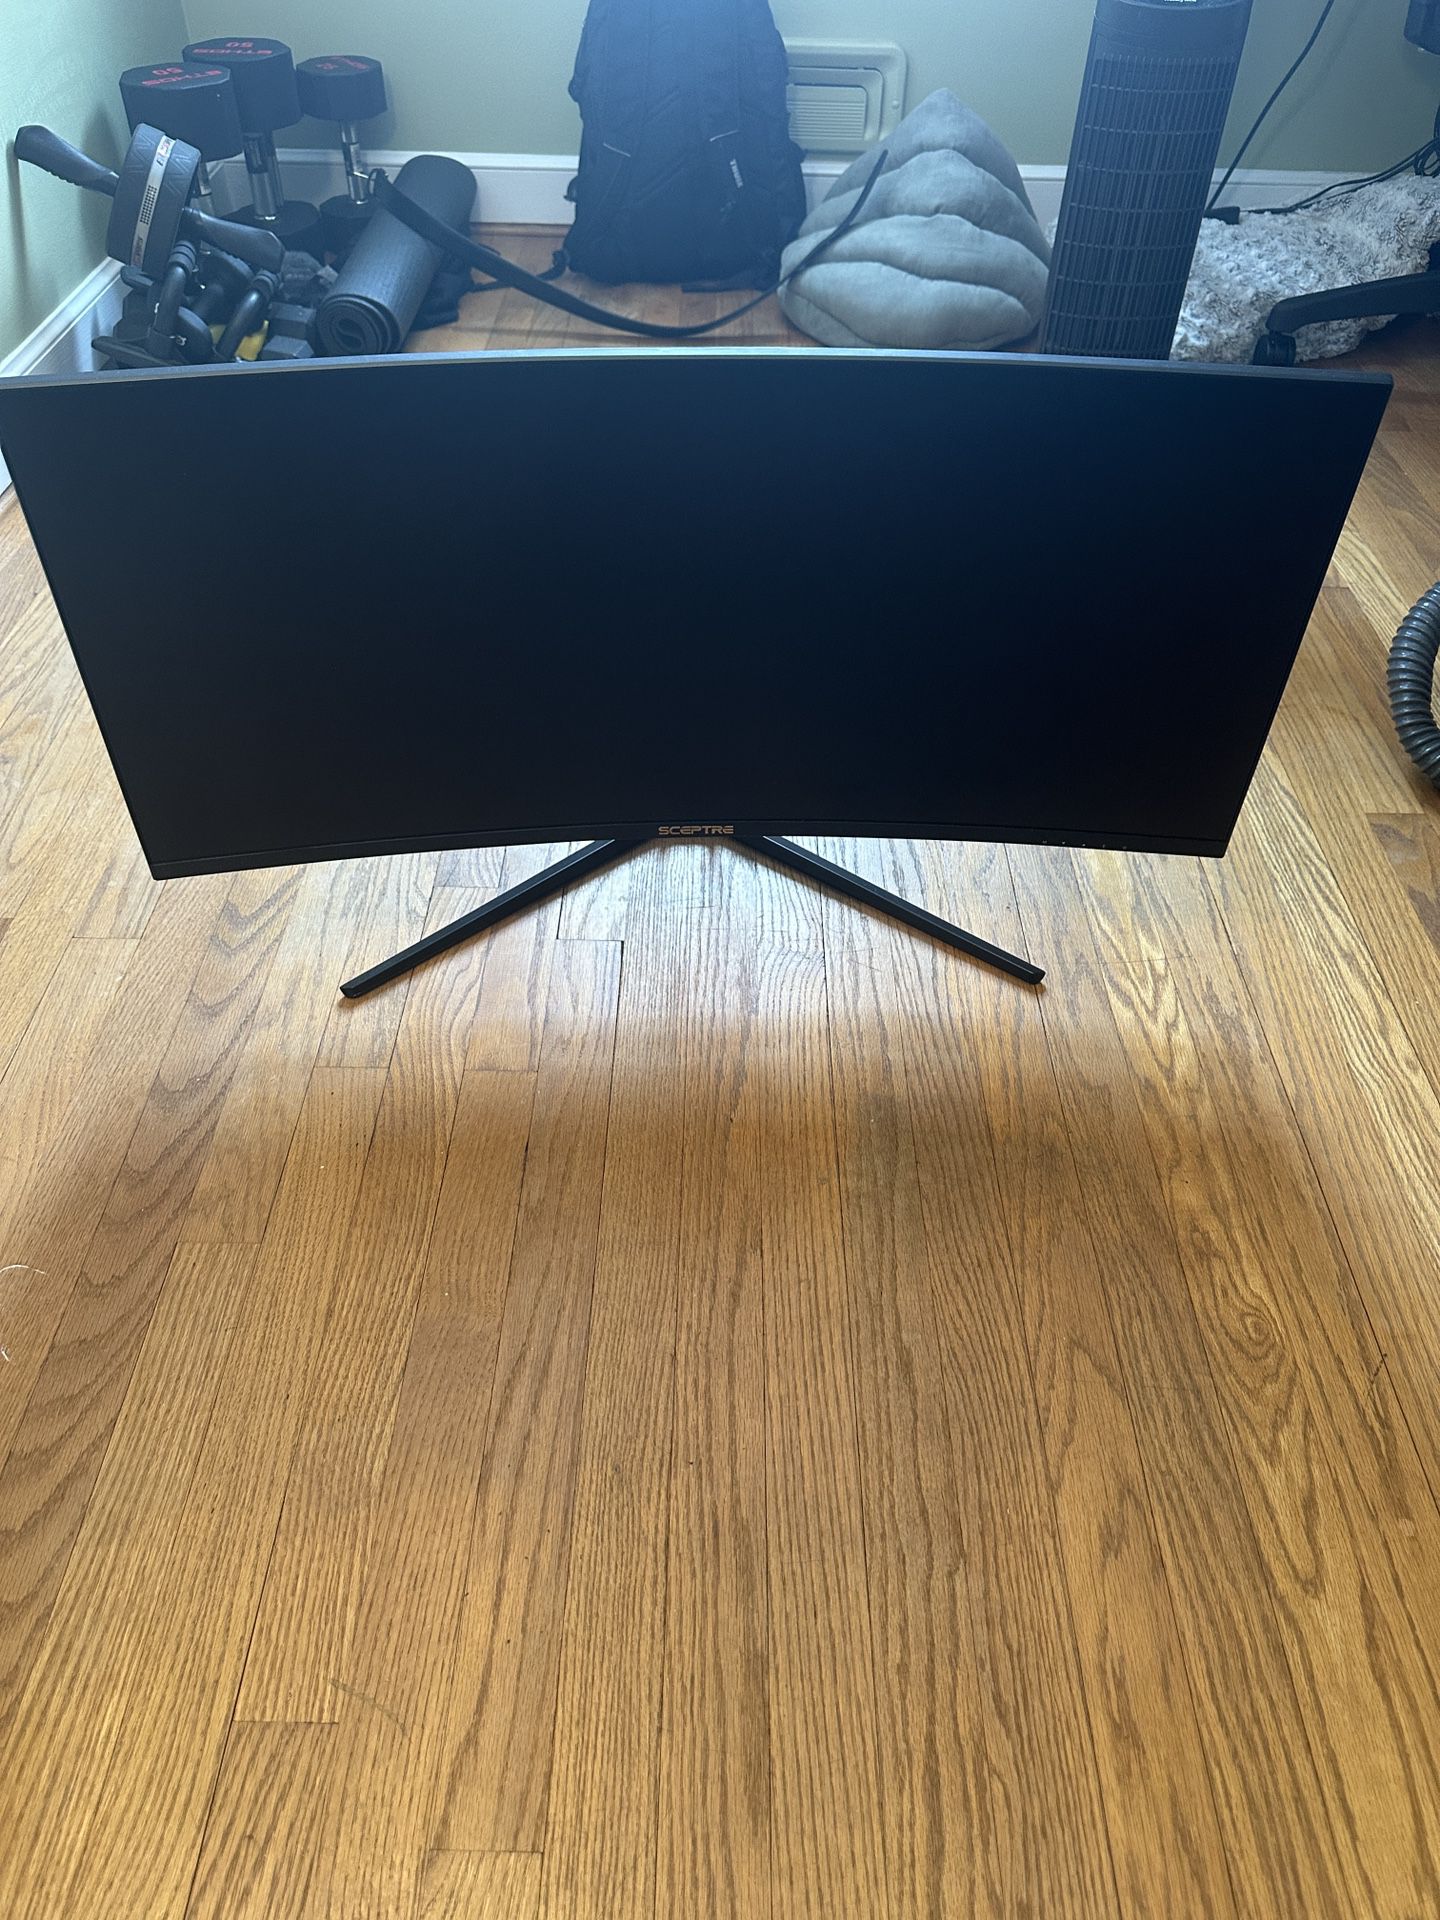 Sceptre Gaming Monitor 34 Inch Curved Display 